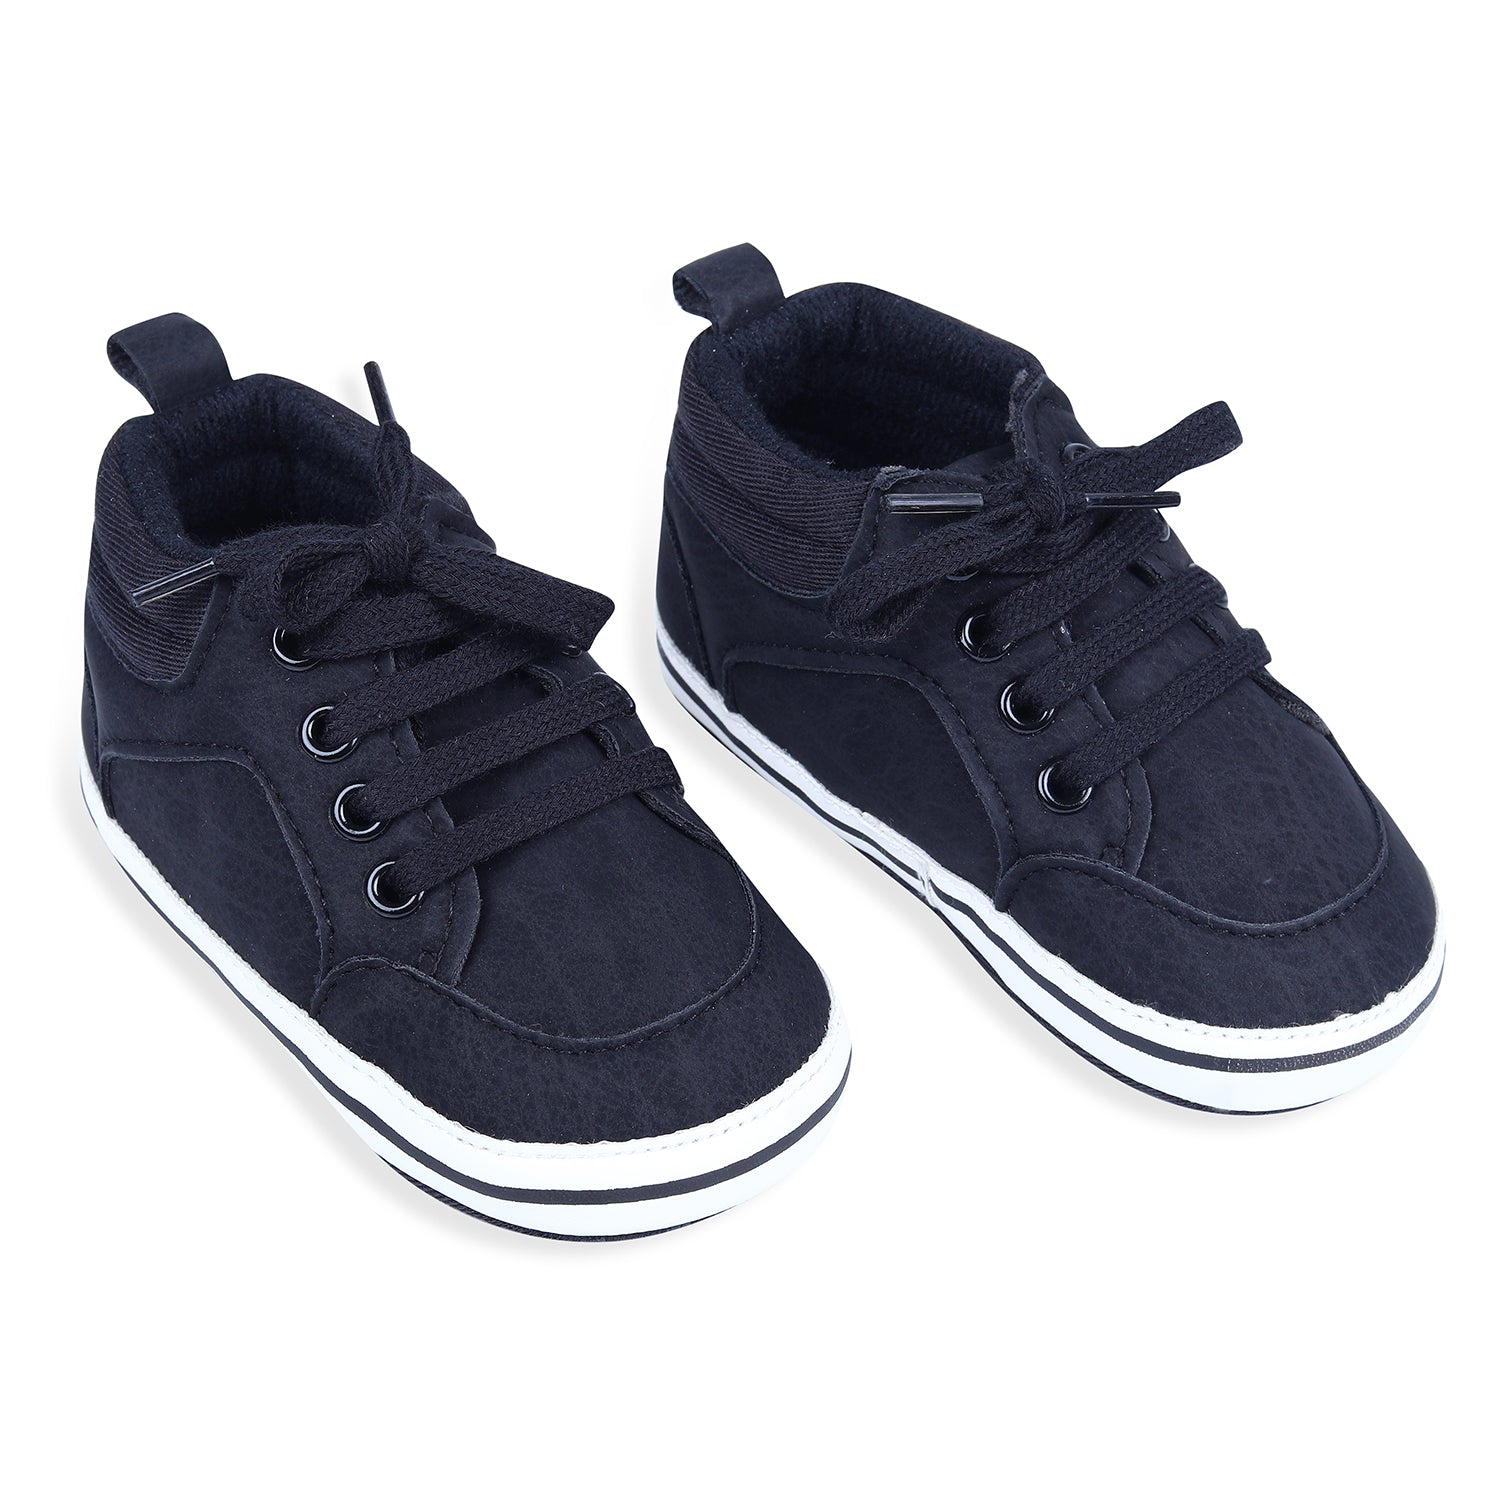 Textured Leather Lace-Up Stylish Anti-Slip Sneaker Shoes - Navy Blue - Baby Moo